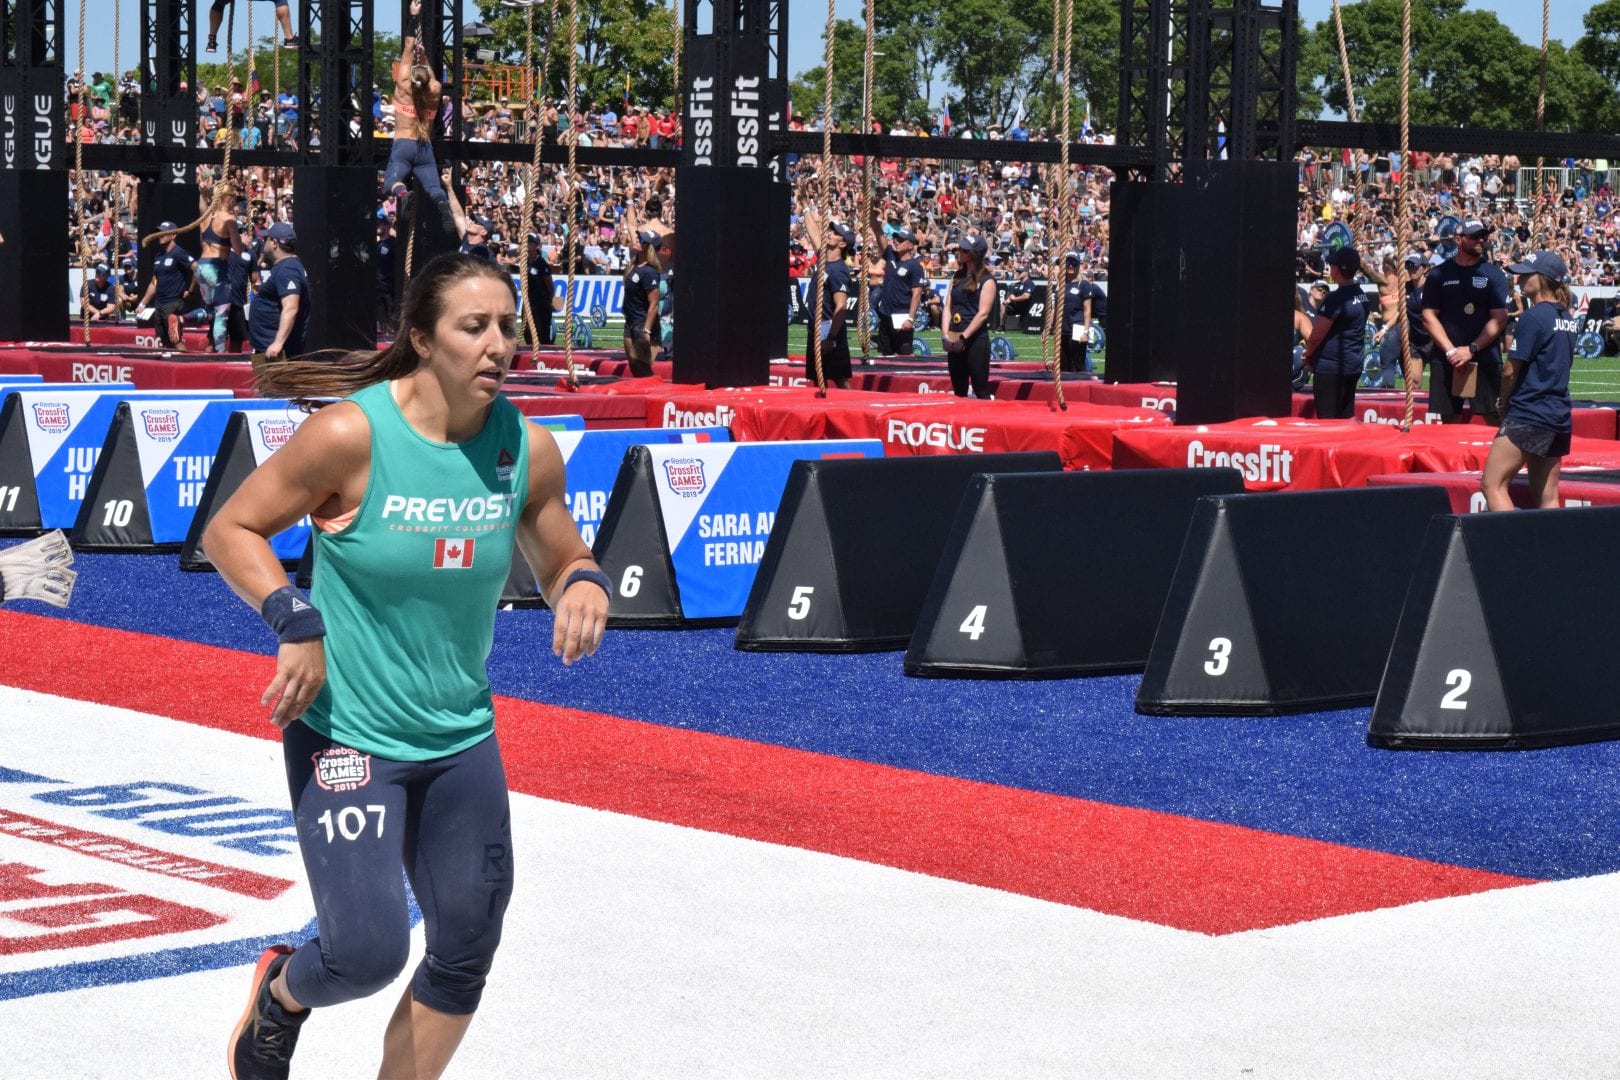 Carolyne Prevost completes a run before returning to legless rope climbs at the 2019 CrossFit Games